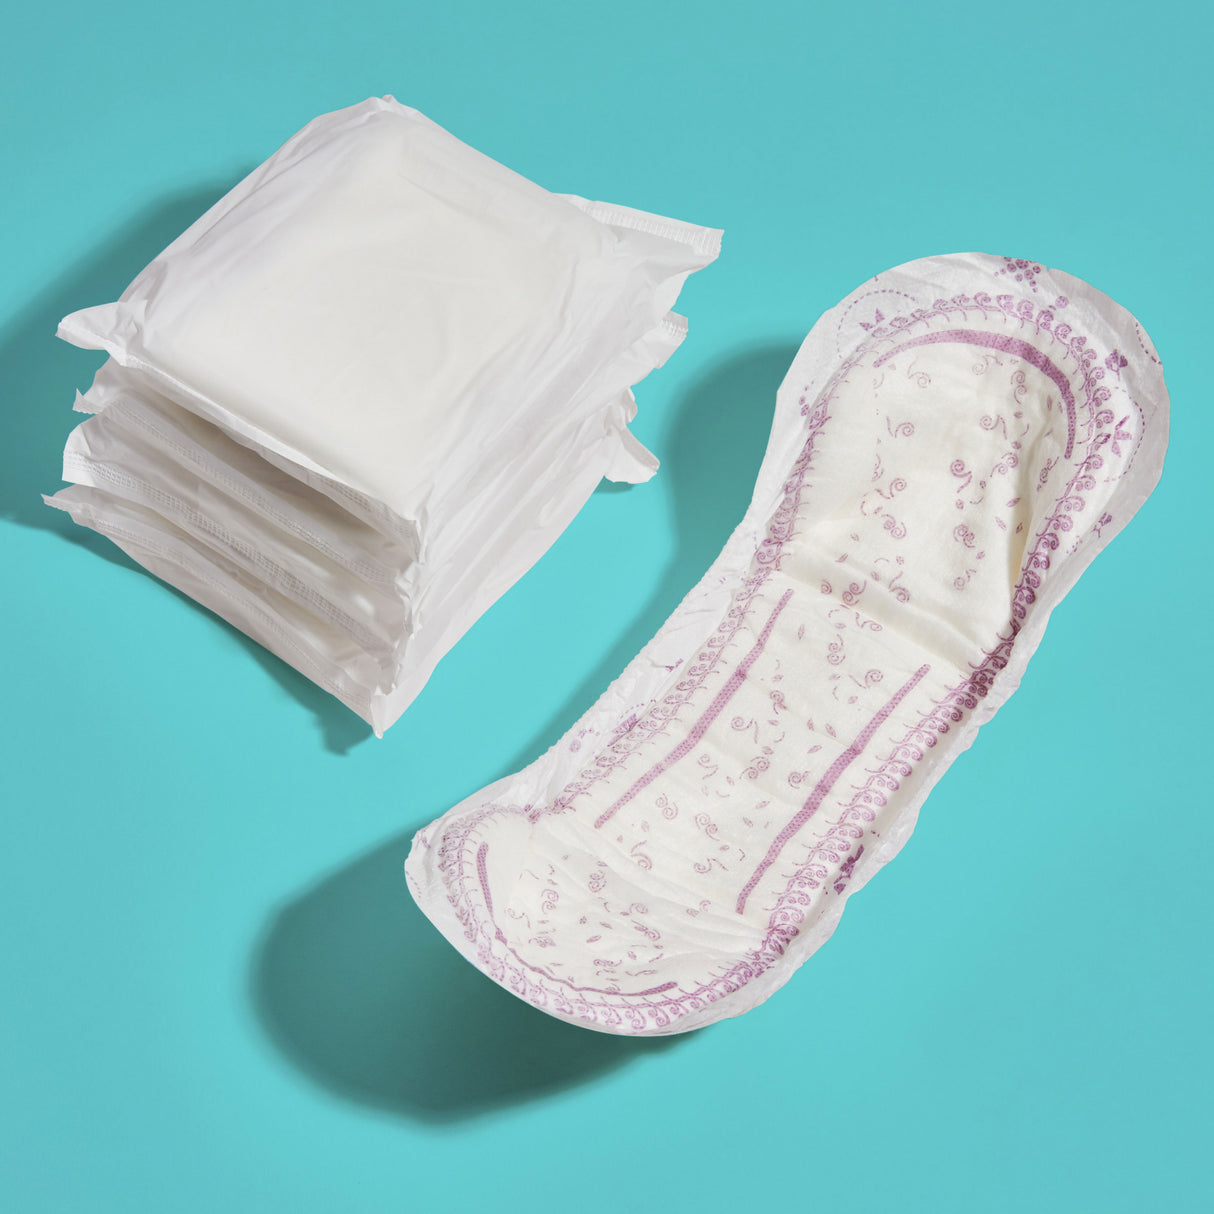 Womens incontinence products • Compare best prices »